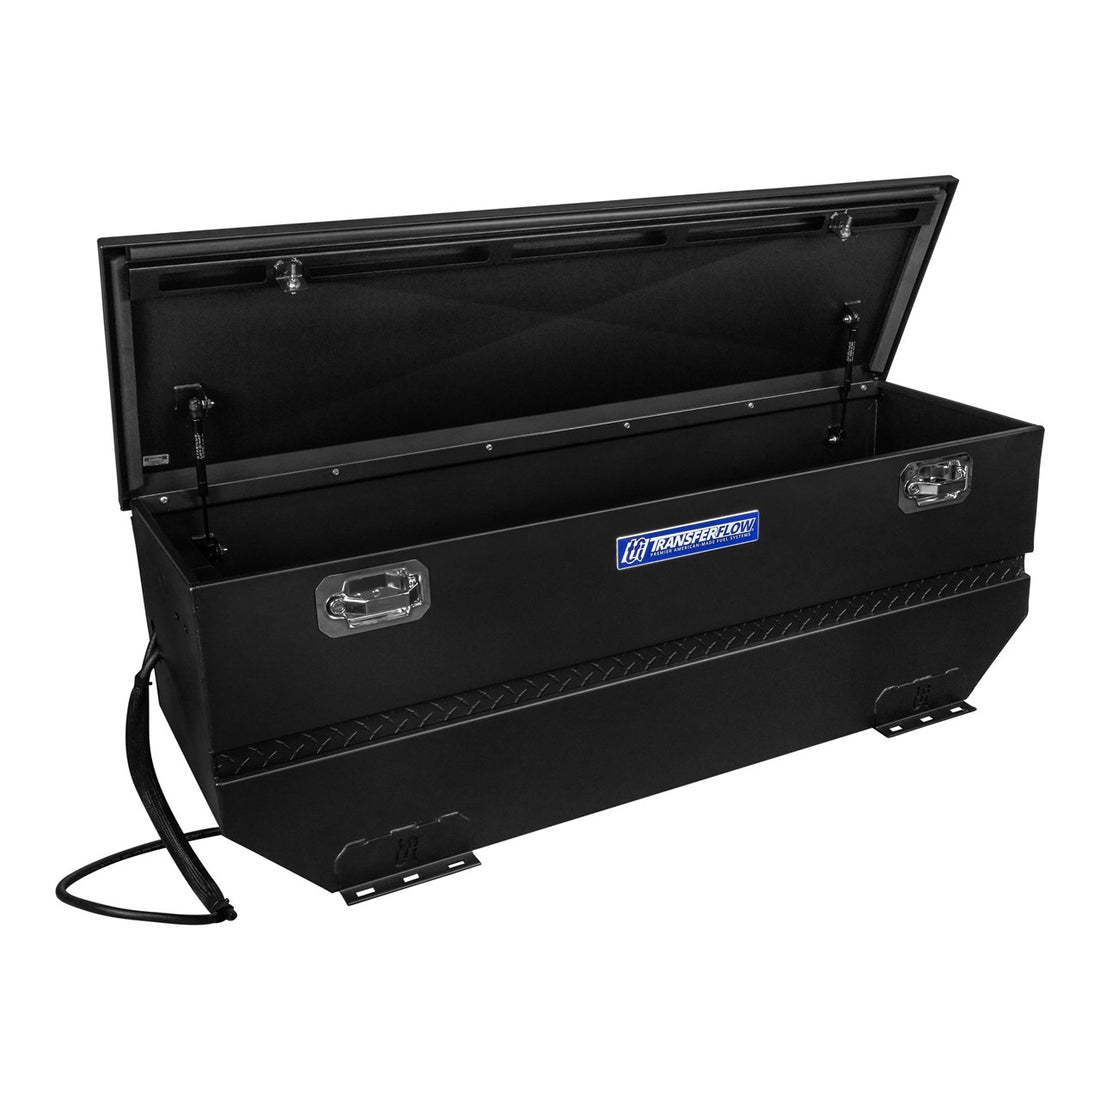 Fuel Tanks  Toolbox Tank Combos by TFI - Quality Bumper